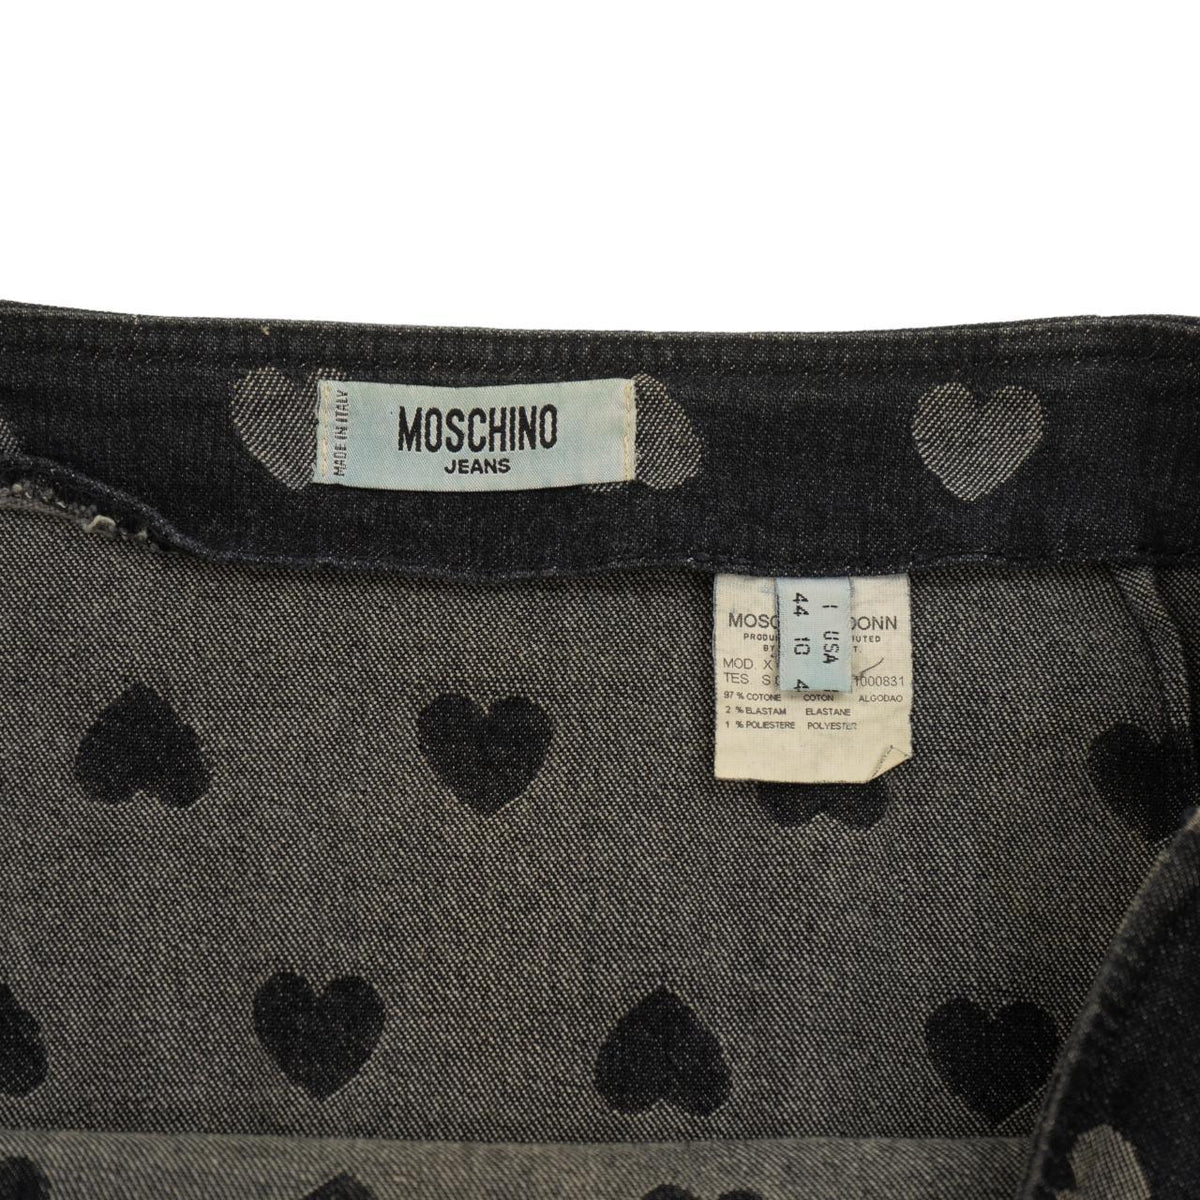 Vintage Moschino Love Heart Skirt Size W31